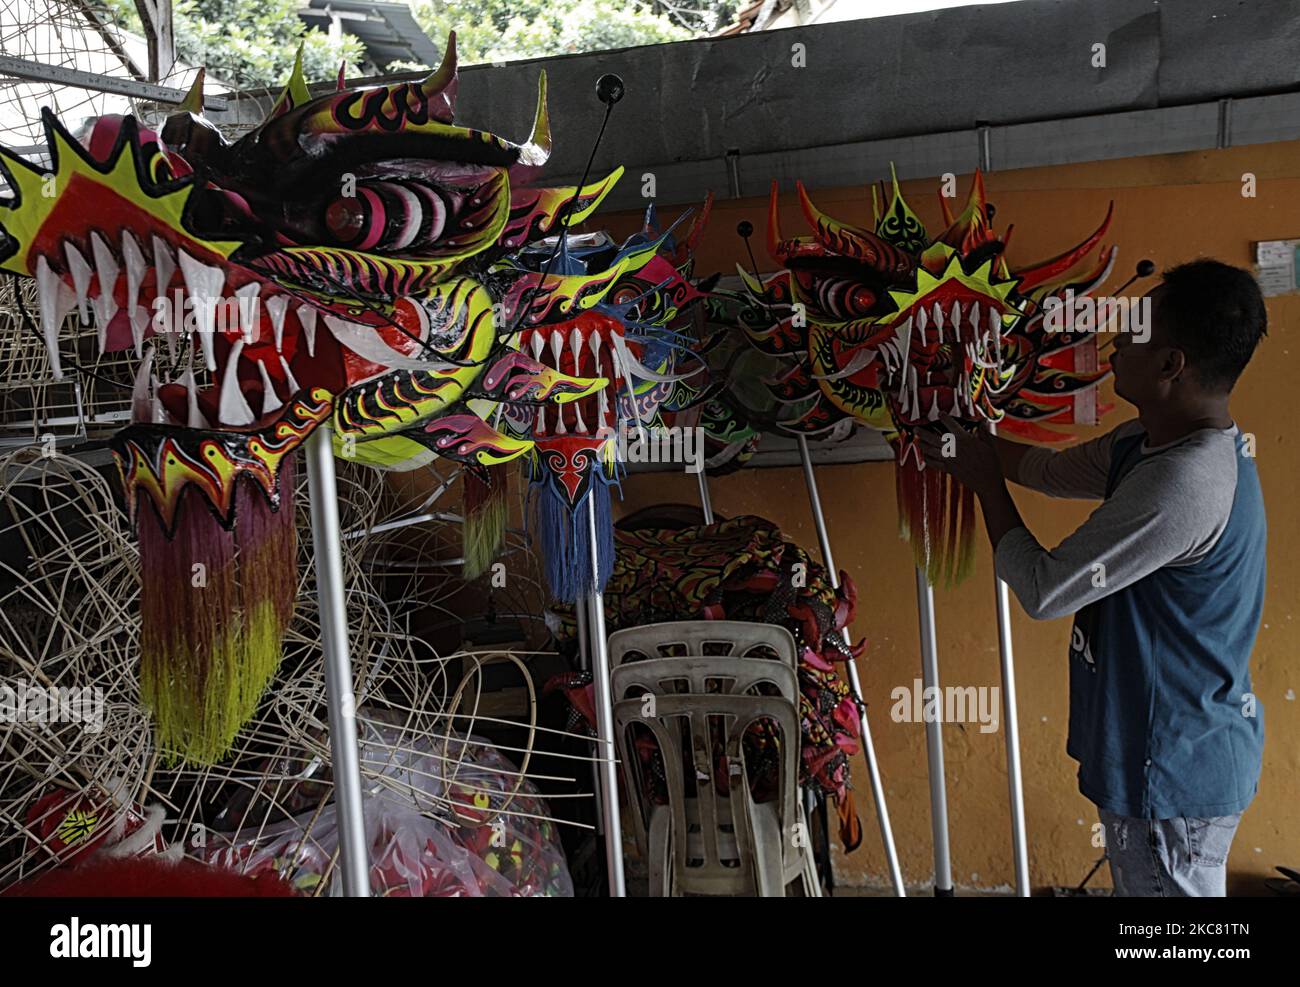 Lili Hambali, 49, a maker of lion (Barongsai) and Liong (dragon) dance costumes, inspects his creations inside his house ahead of Lunar New Year celebrations, in Bogor, West Java, Indonesia on January 23, 2021. Millions of Chinese around the world will celebrate the Lunar New Year, 2021 is the year of the Ox, which falls on February 12th amid the global coronavirus COVID-19 pandemic. (Photo by Adriana Adie/NurPhoto) Stock Photo